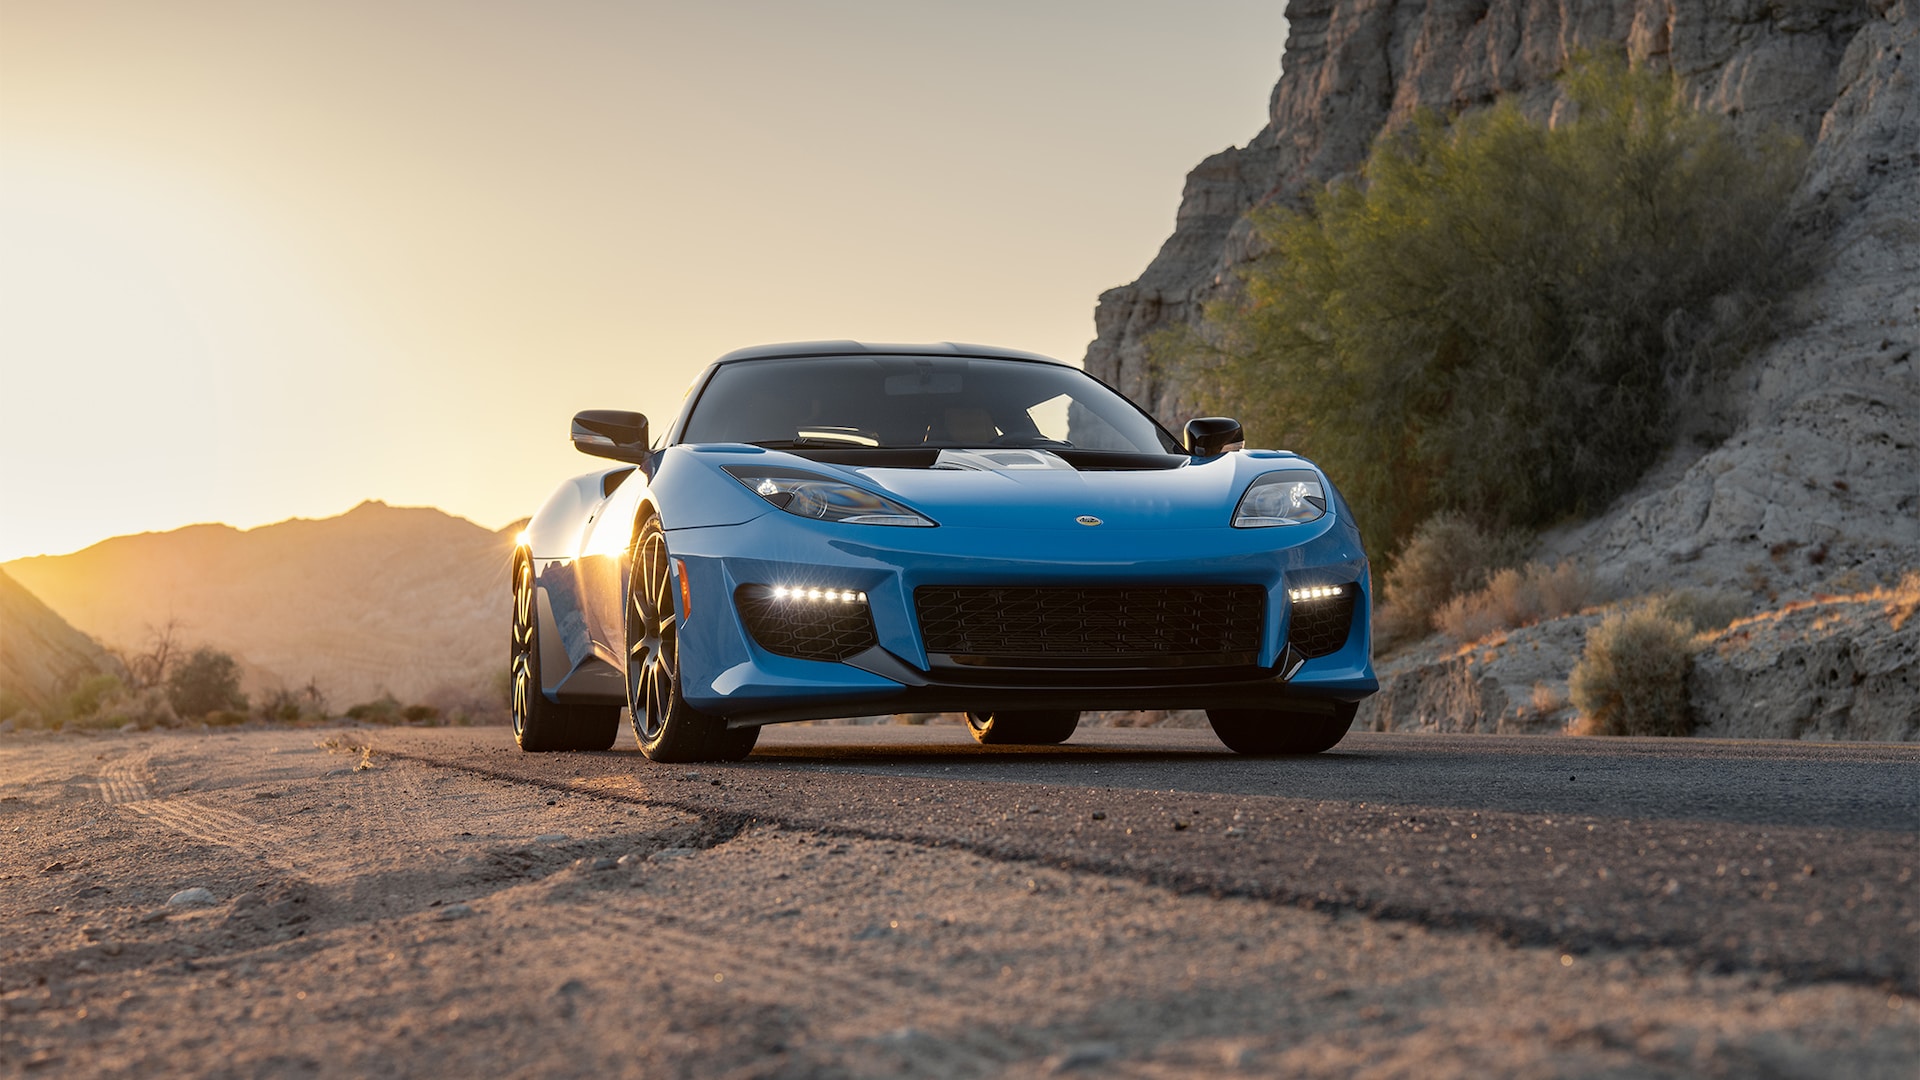 2021 Lotus Evora GT First Test: The Cayman Fighter It Always Should've Been